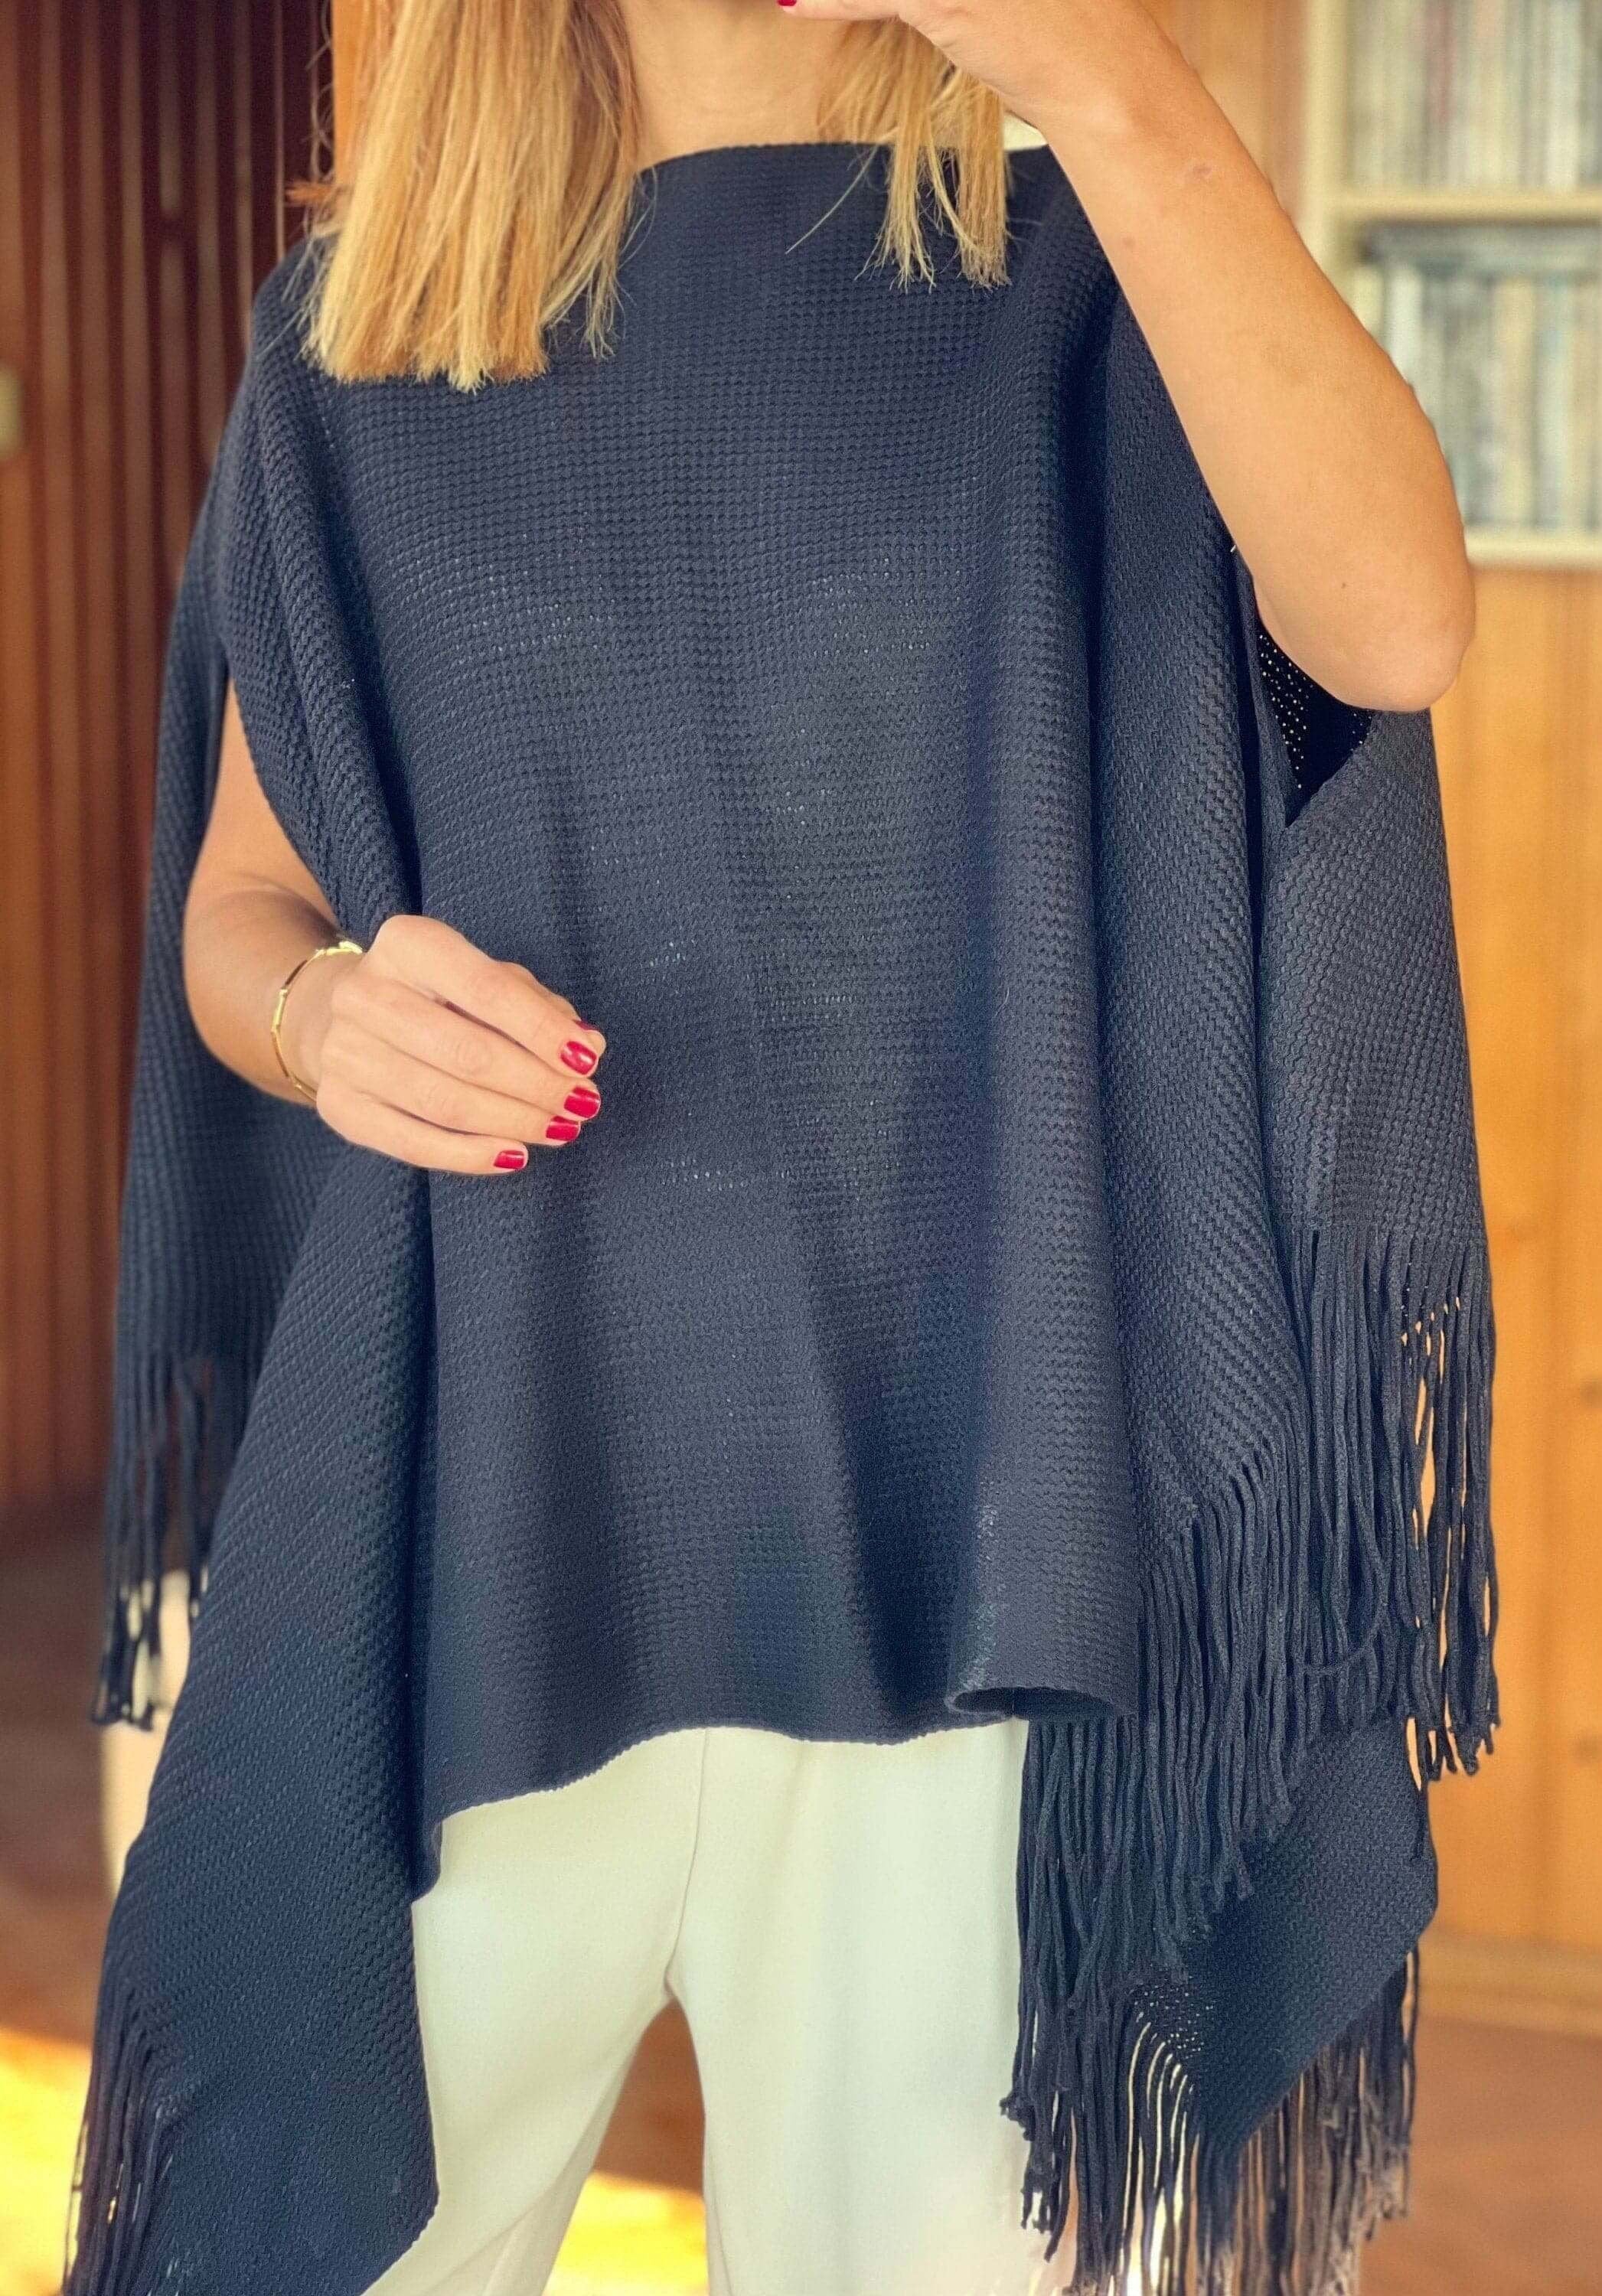 Wrap yourself up in cozy comfort with our Navy Blue Mercerize Cotton Large Poncho Cardigan.